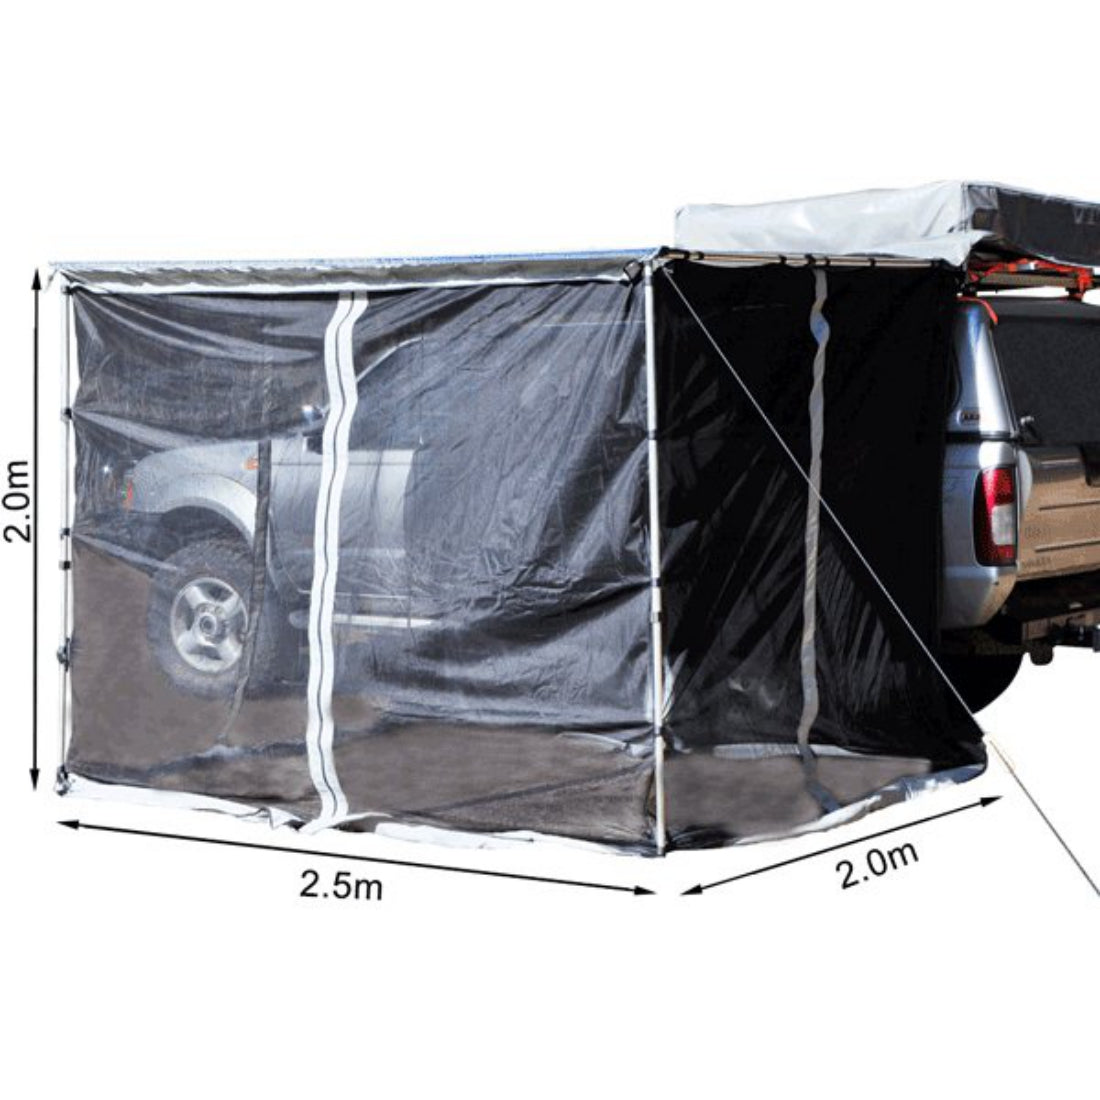 2M X 3M Awning Mosquito Net Camping Outdoor